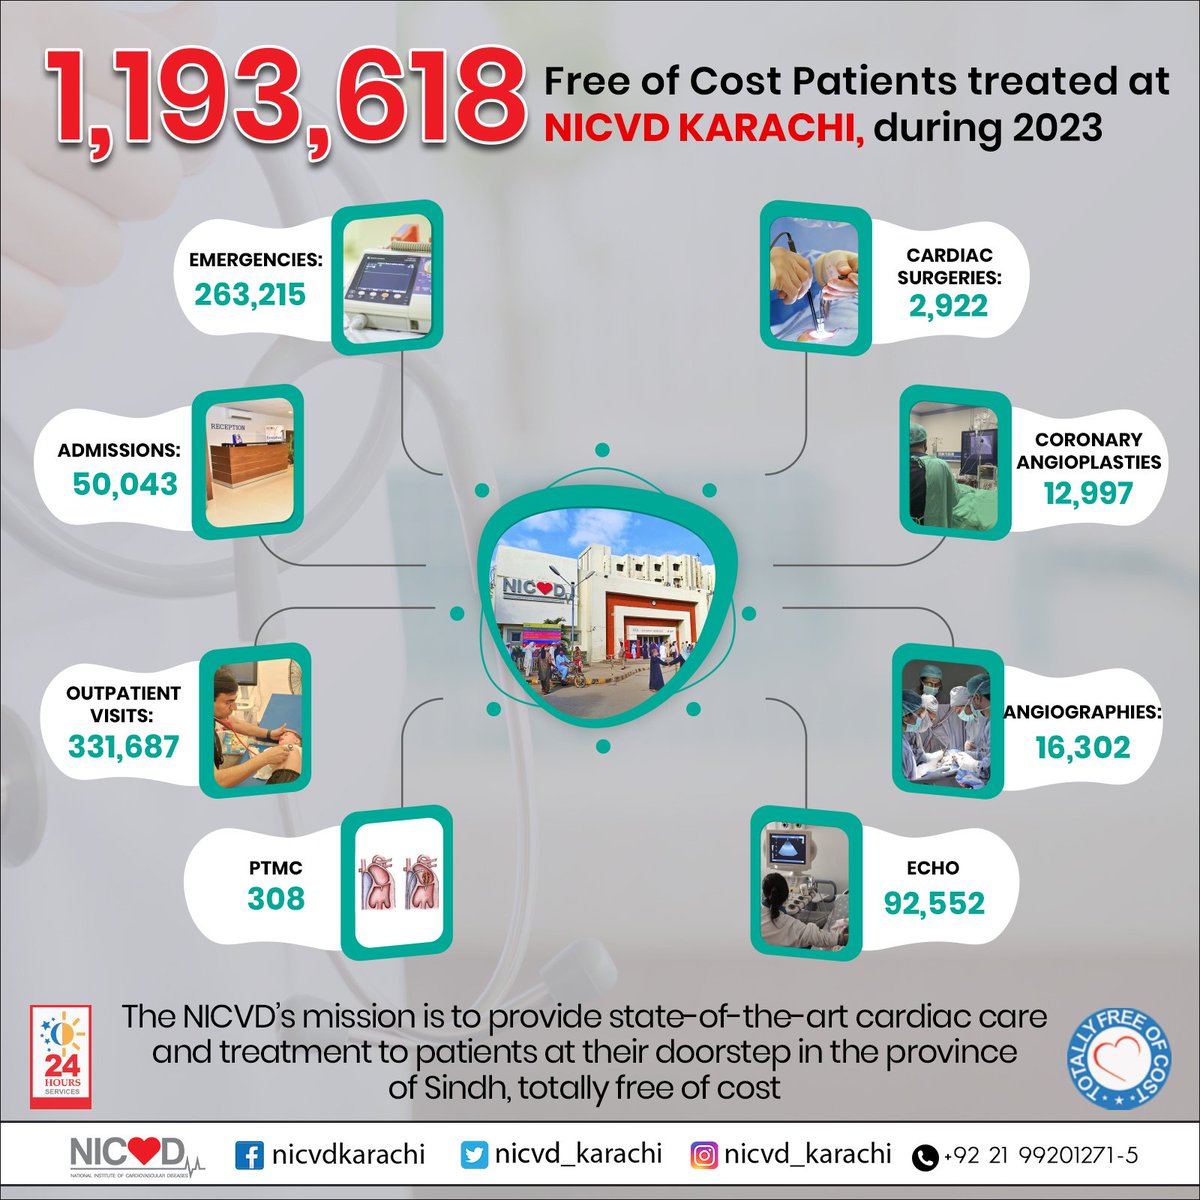 In 2023, NICVD Karachi served the heart health of the community by providing free treatment to 1,193,618 patients. We’re here for every heart.❤️
#NICVD #HealthcareForAll #FreeOfCost #VoteForPPP 
@BBhuttoZardari